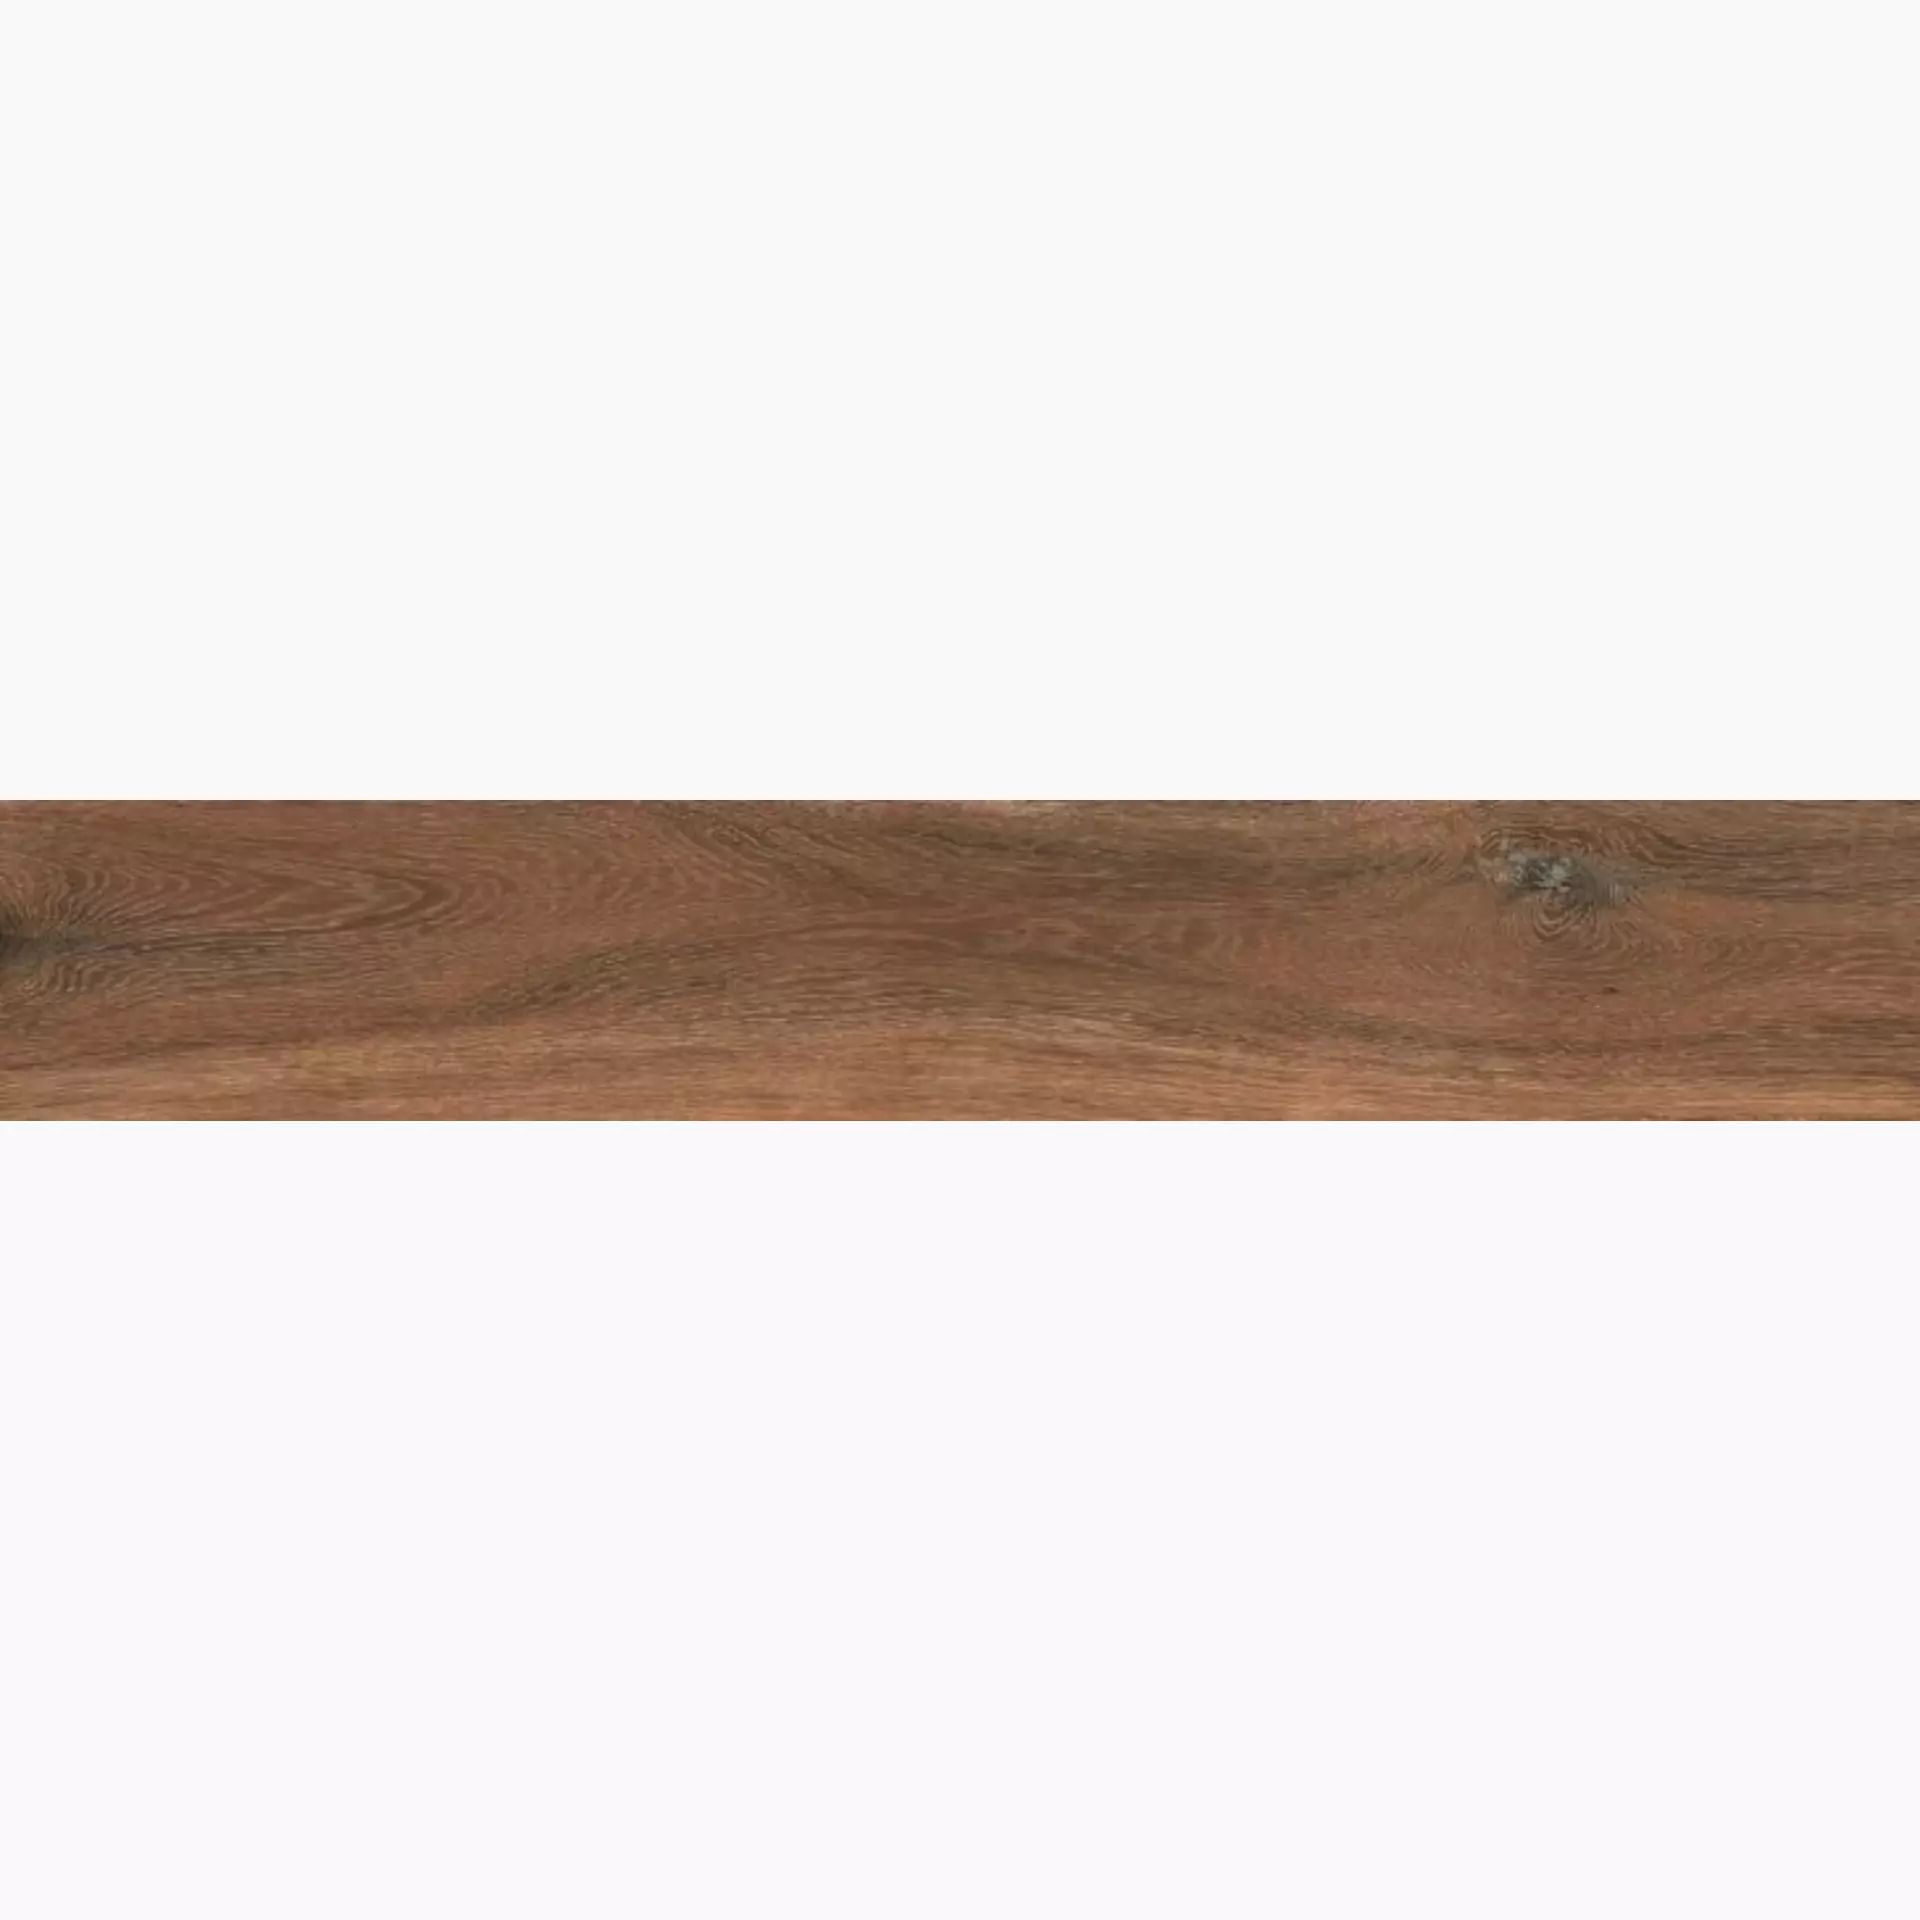 Sant Agostino Barkwood Cherry Natural CSABA7CH18 30x180cm rectified 10mm